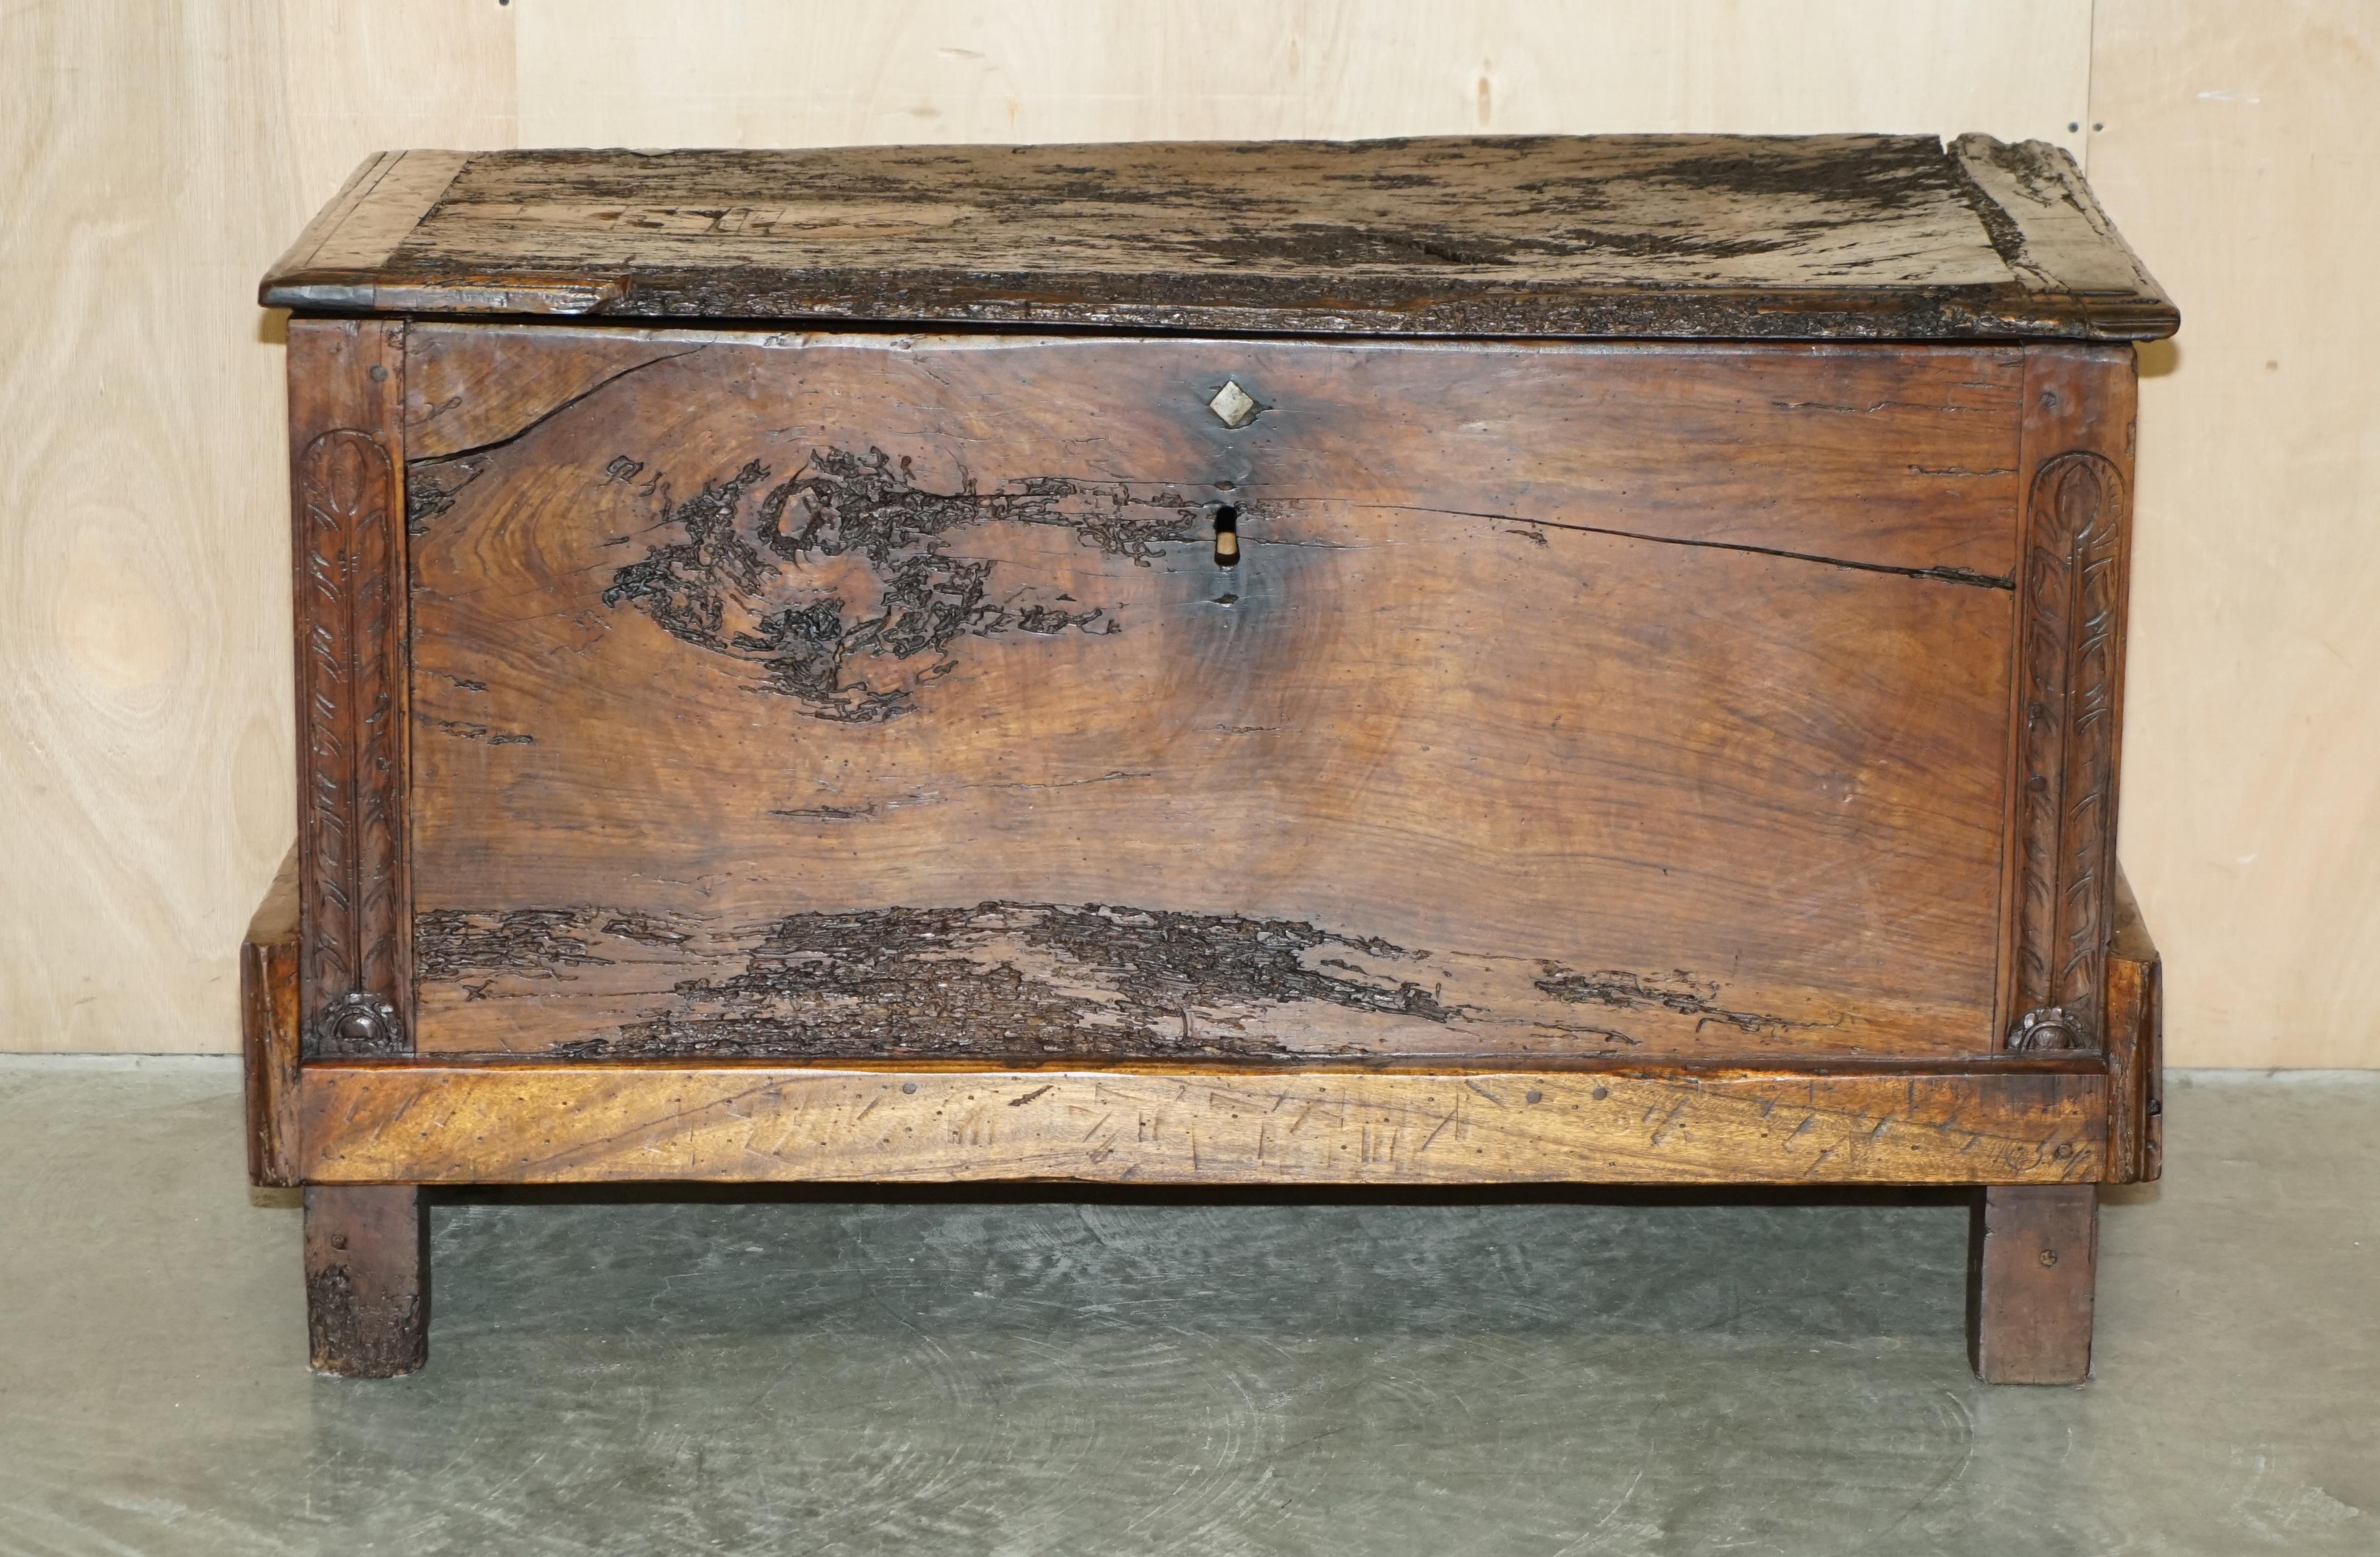 Georgian ANTiQUE 18TH CENTURY SIX PLANK HEAVILY BURRED CHESTNUT WOOD TRUNK CHEST For Sale